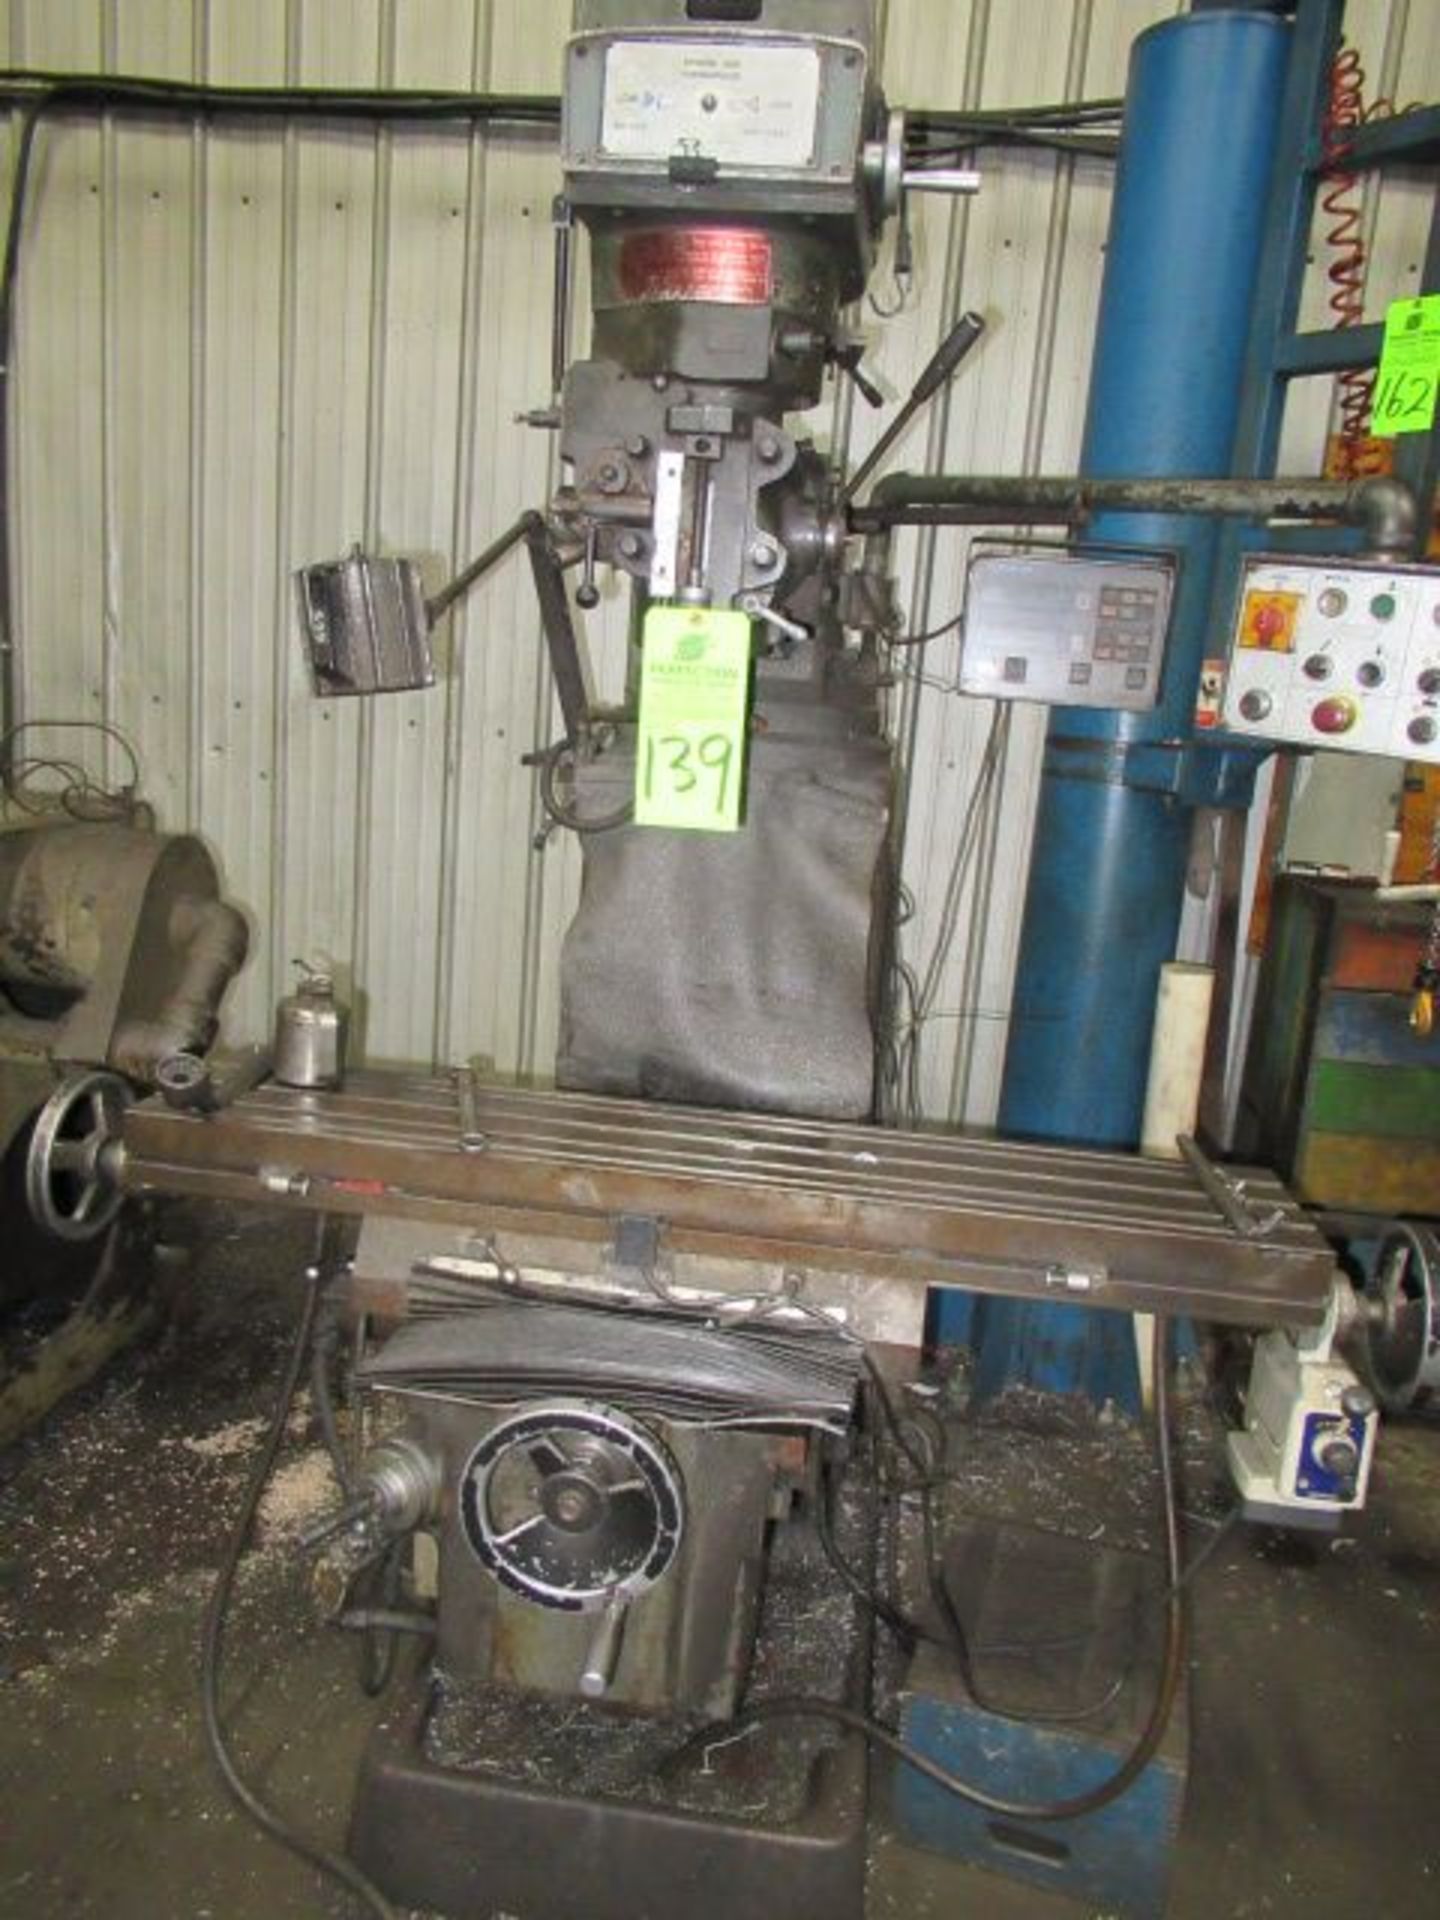 EAST LION 5 hp Vertical Mill, s/n 980203, w/ Power Feed Table ($900 Rigging Cost)